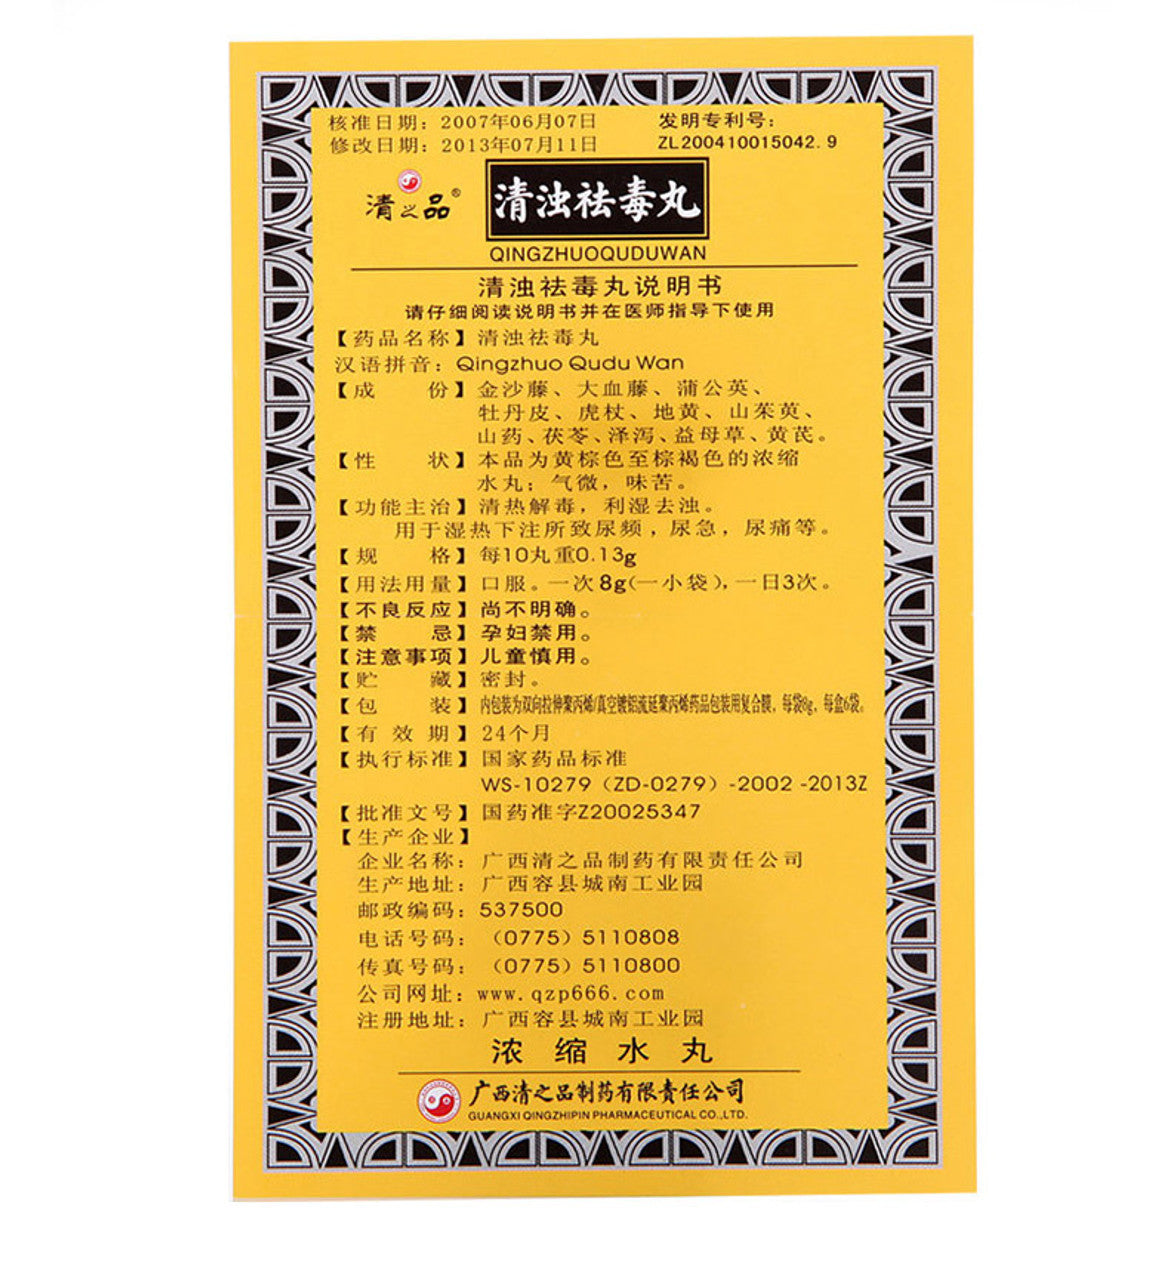 Chinese Herbs. Brand QINGZHIPIN. QINGZHUOQUDUWAN or Qingzhuo Qudu Wan or QingZhuo Qudu Pills or Qing Zhuo Qu Du Wan or Qing Zhuo Qu Du Pills for  frequent urination, urgency, and dysuria caused by hot and humid betting.